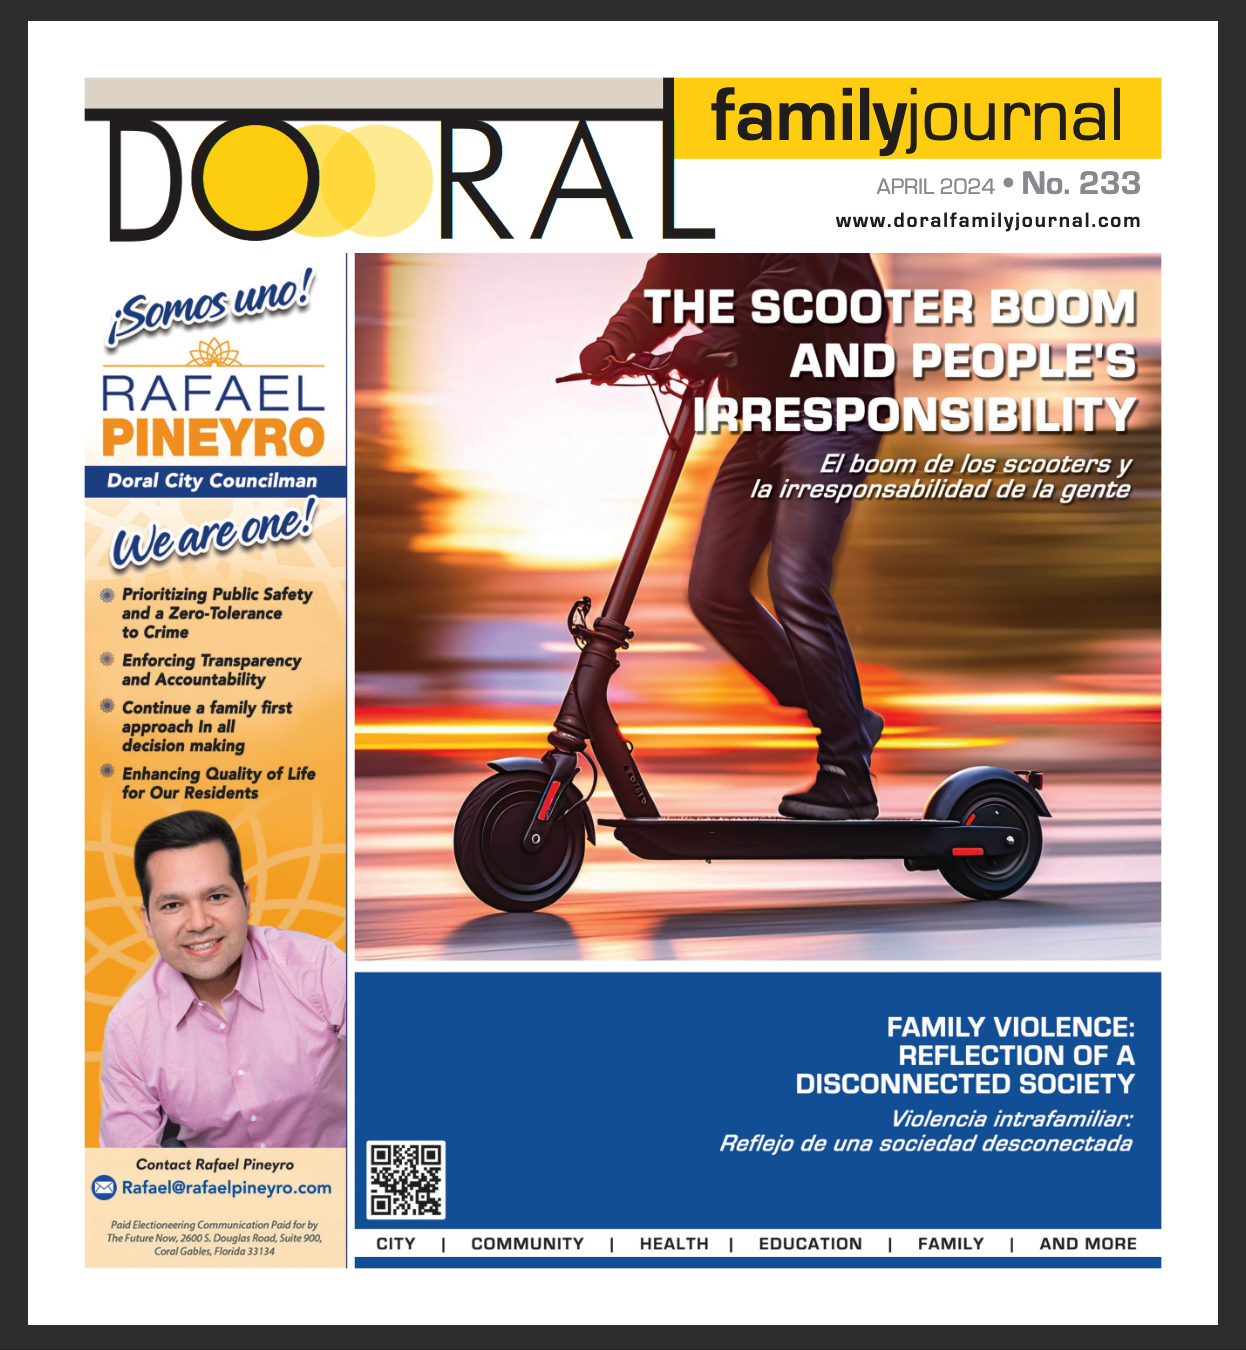 Doral Family Journal - April edition - City of Doral news